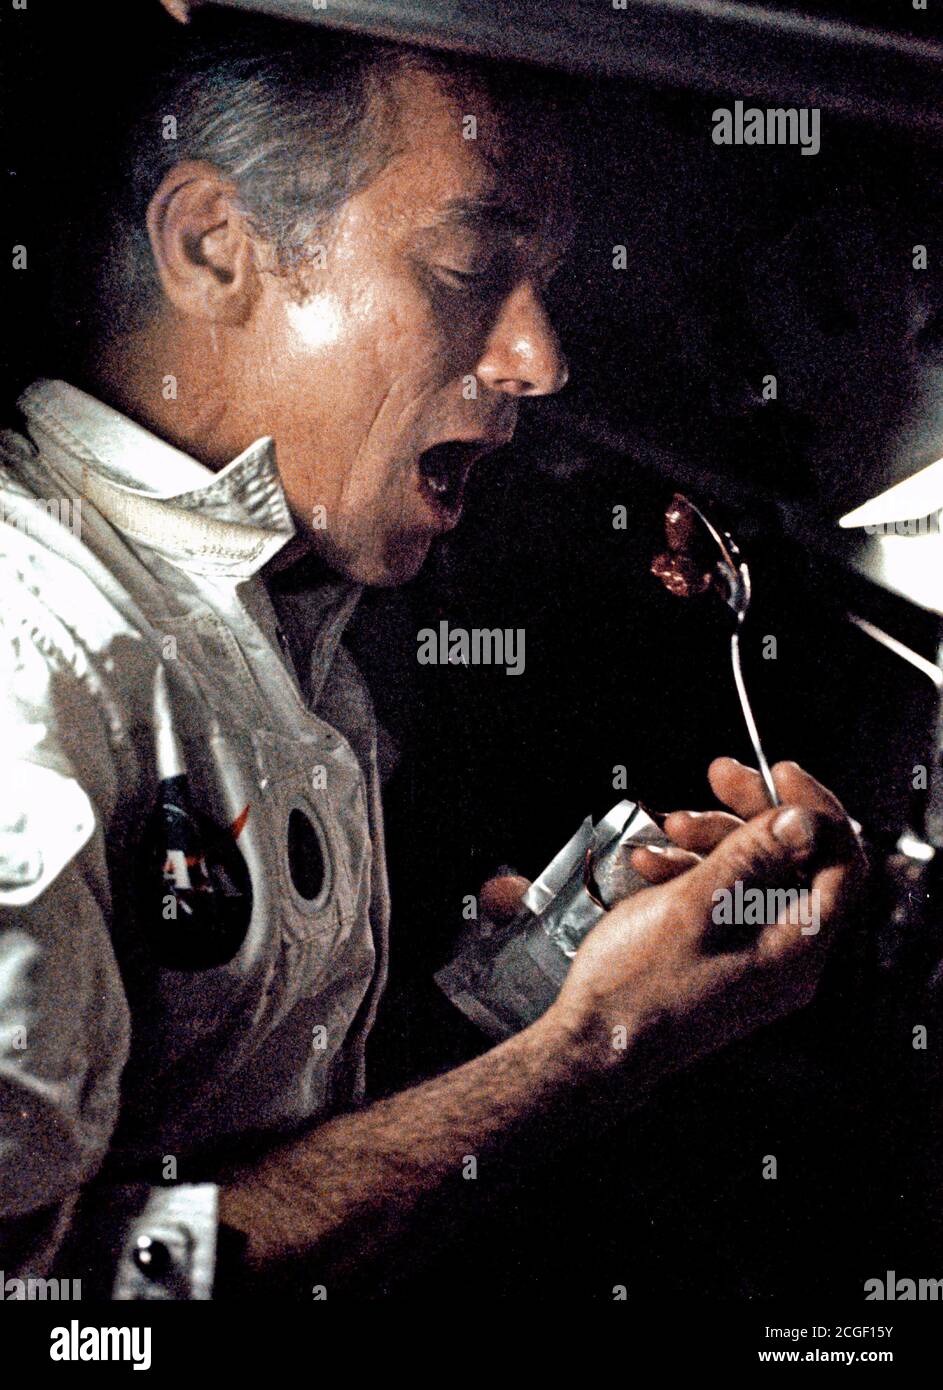 (7-19 Dec. 1972) --- A fellow crewman took this photograph of astronaut Eugene A. Cernan eating a meal under weightlessness conditions of space during the final lunar landing mission in NASA's Apollo program. Stock Photo